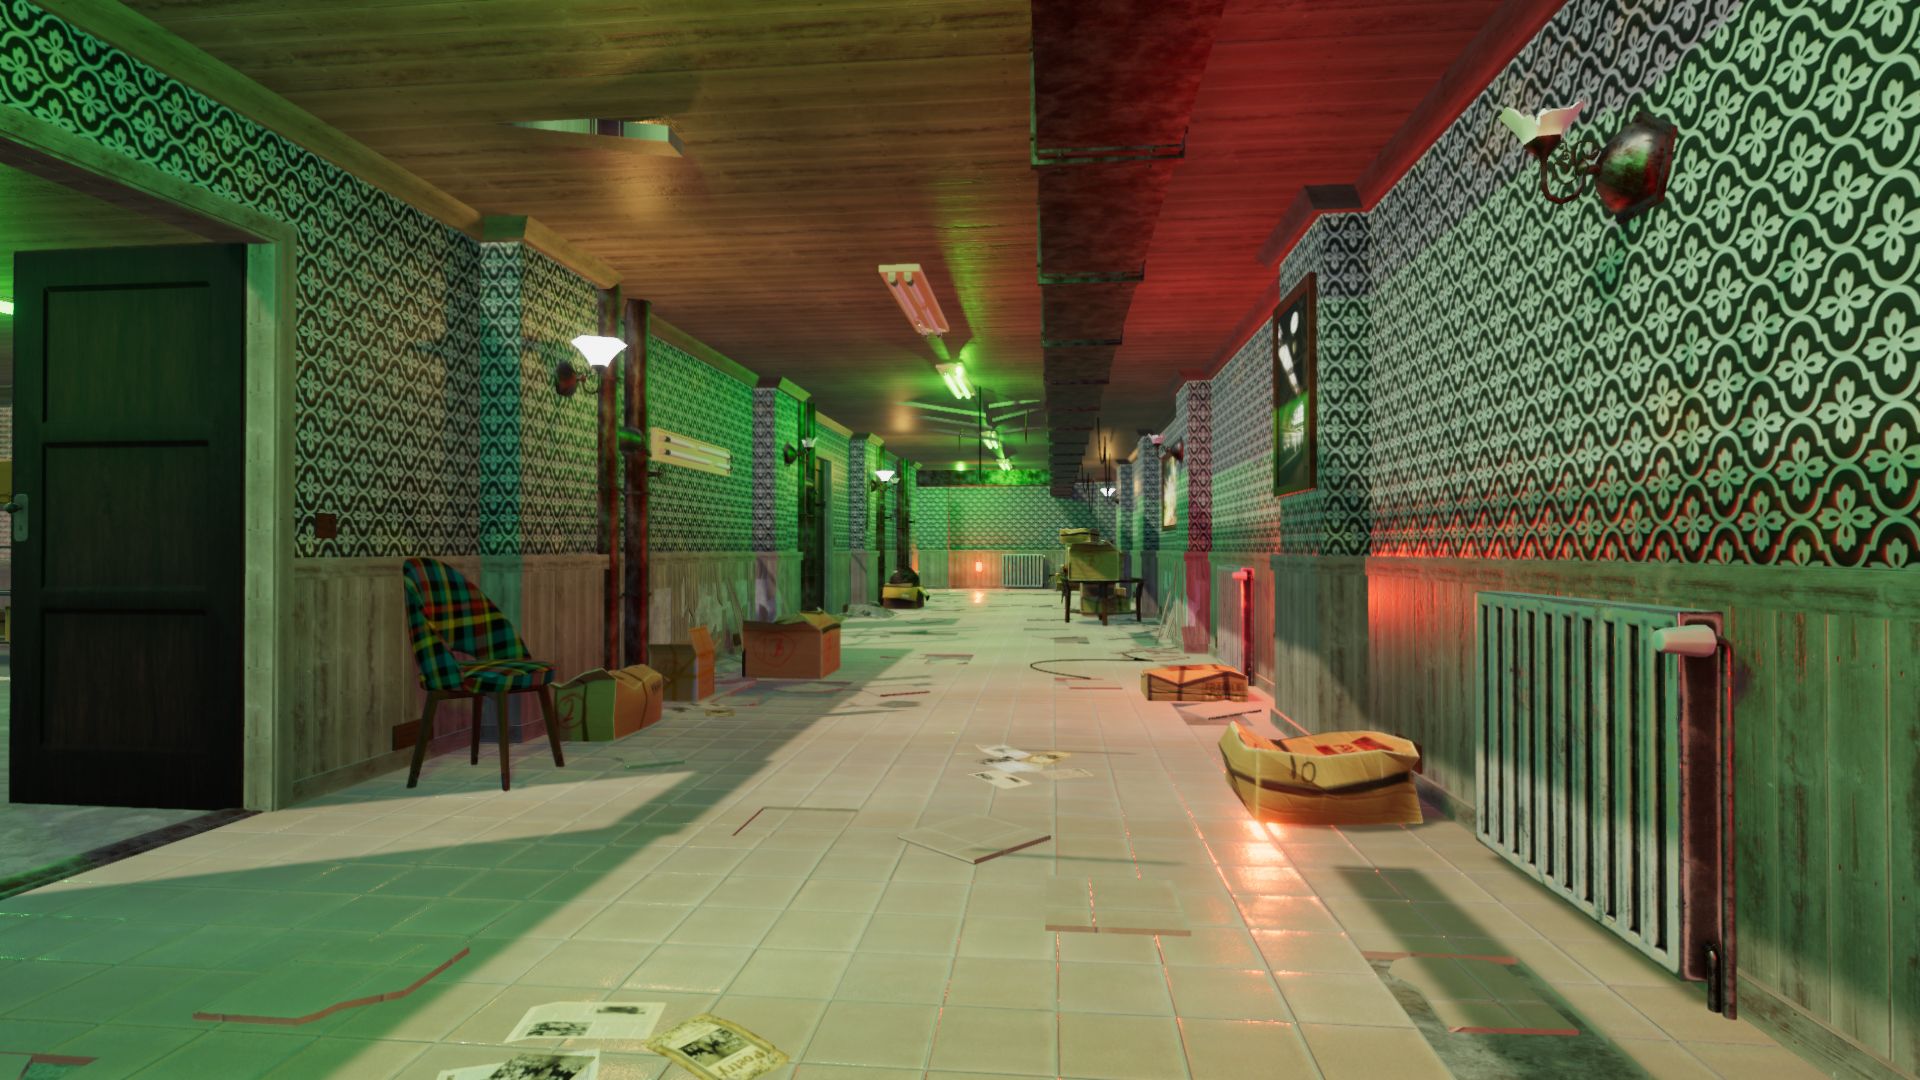 An image showing Dirty Corridors asset pack, created with Unity Engine.